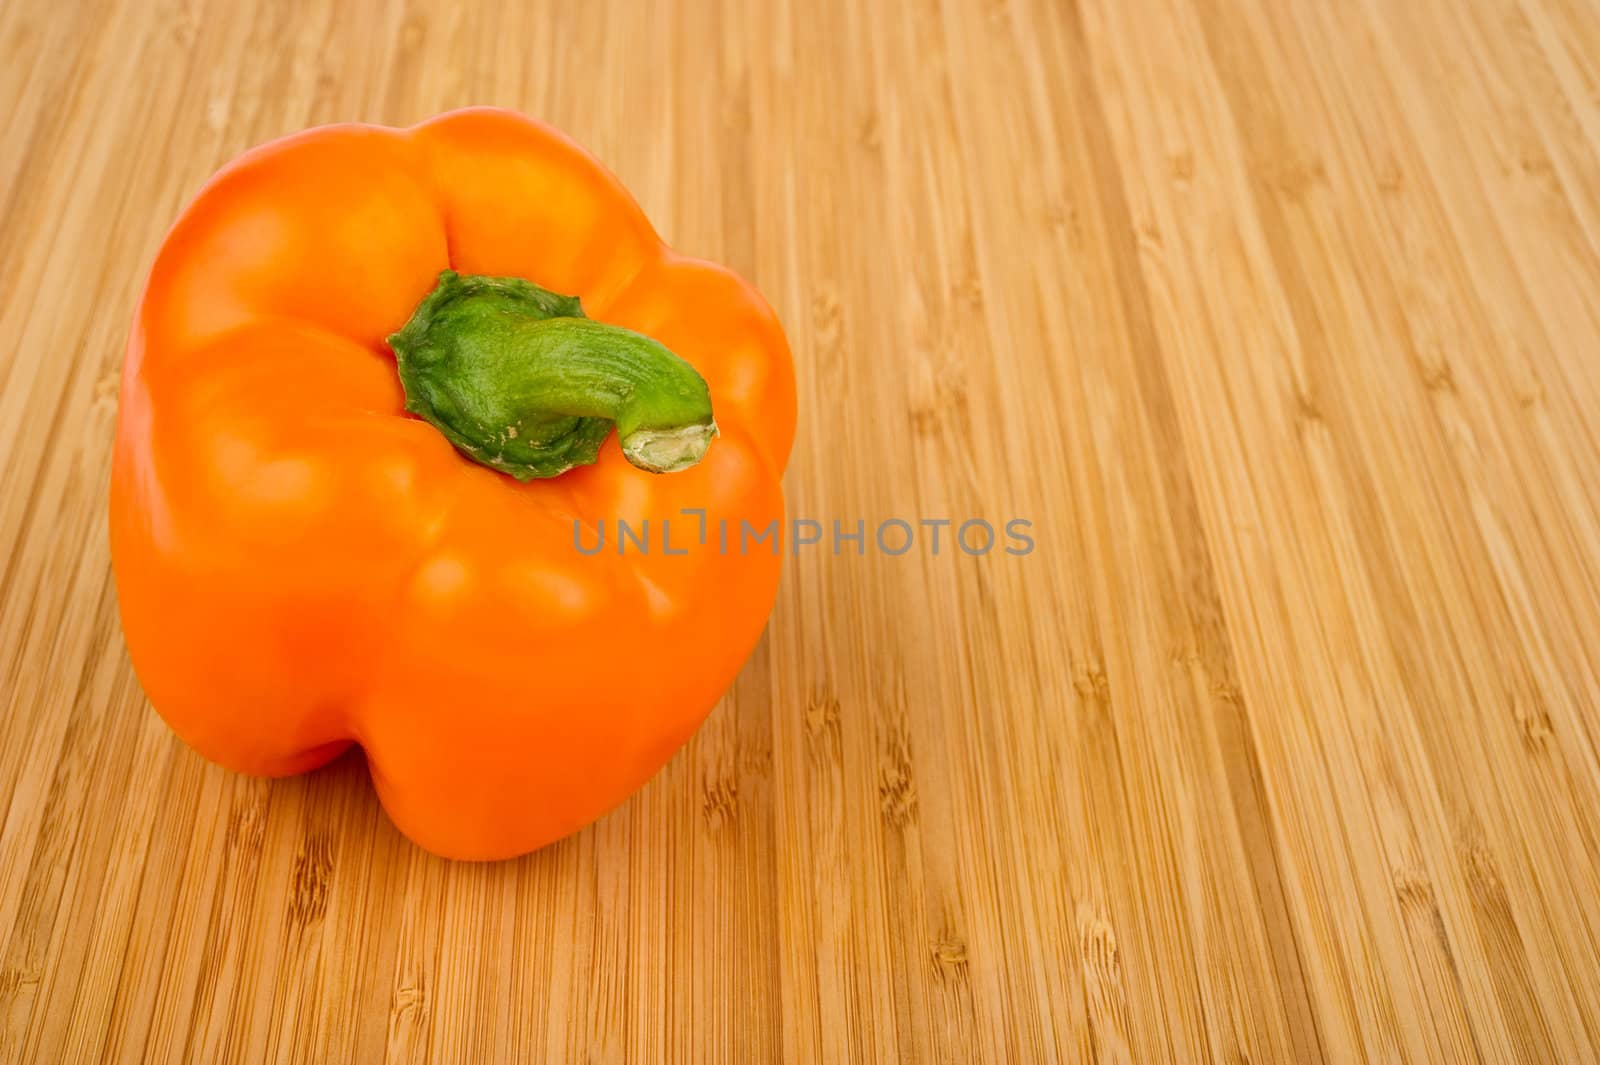 Image of an orange bell pepper on a wooden cutting board